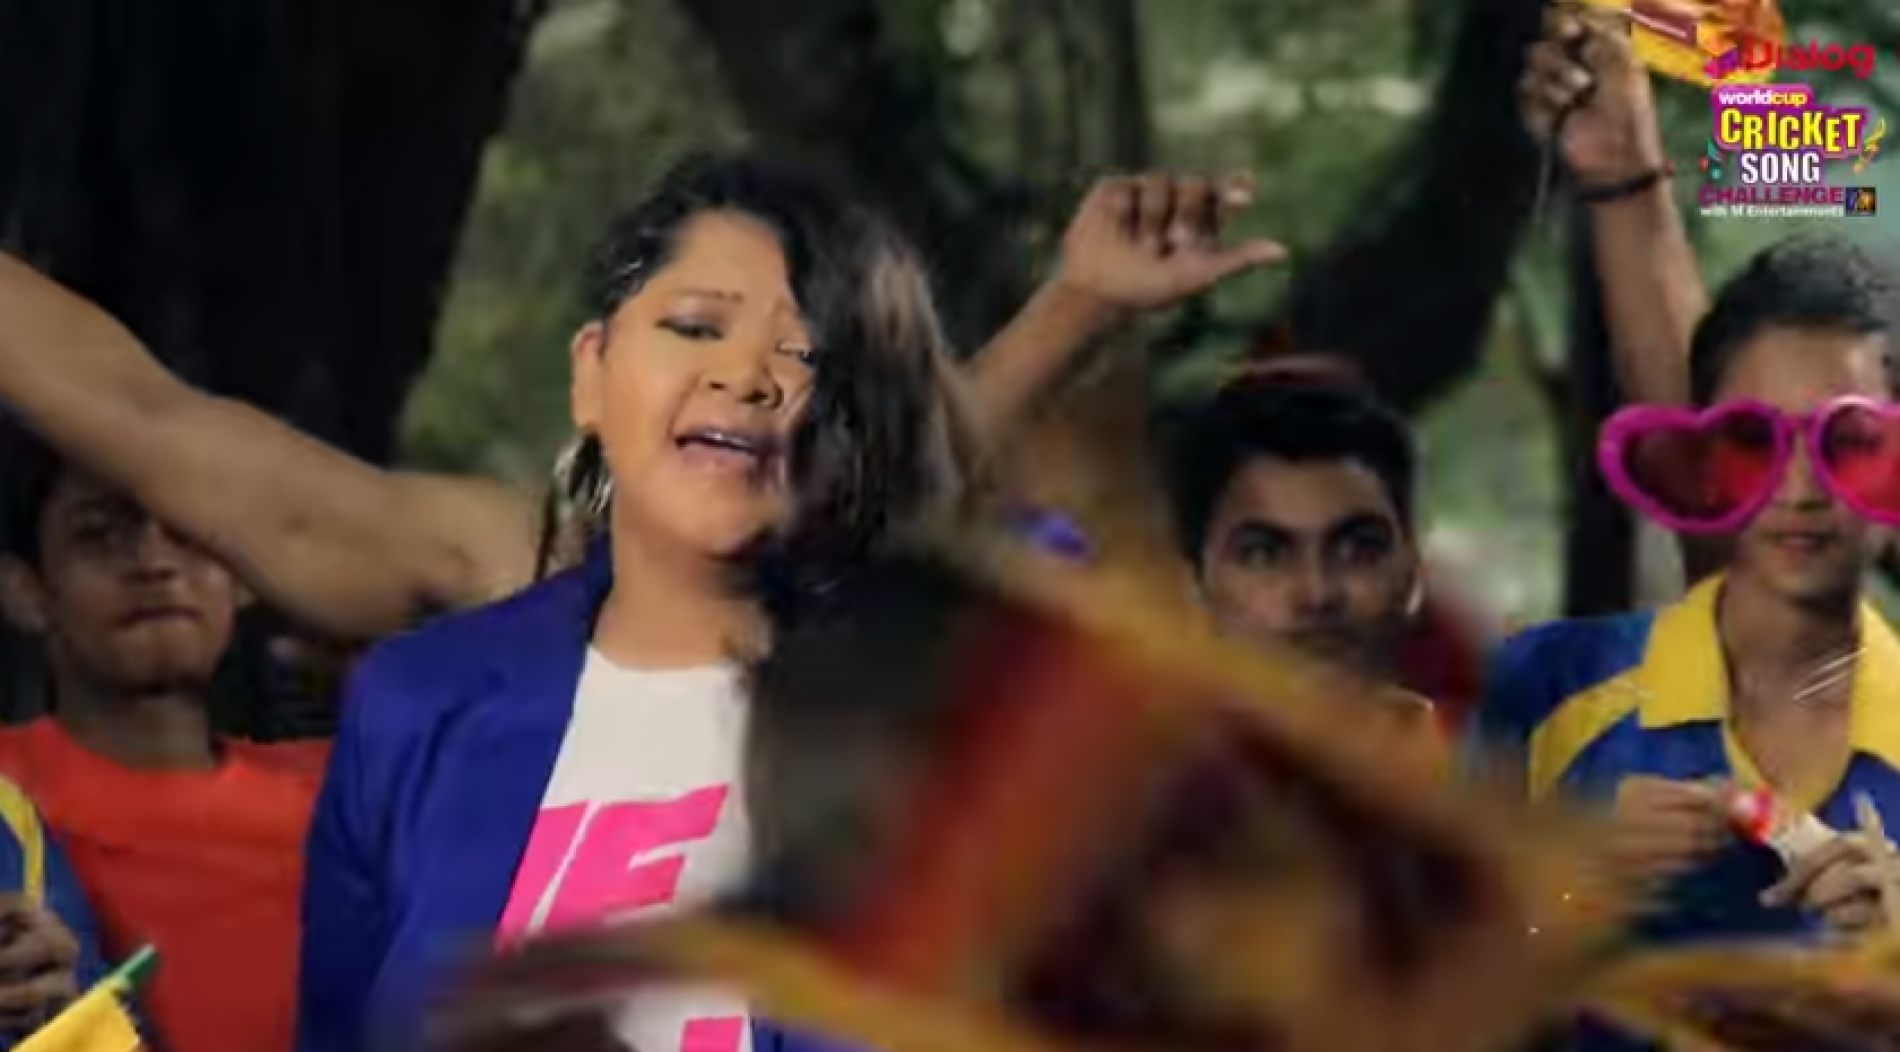 Ashanthi: Lions Roar (Cricket World Cup Song)